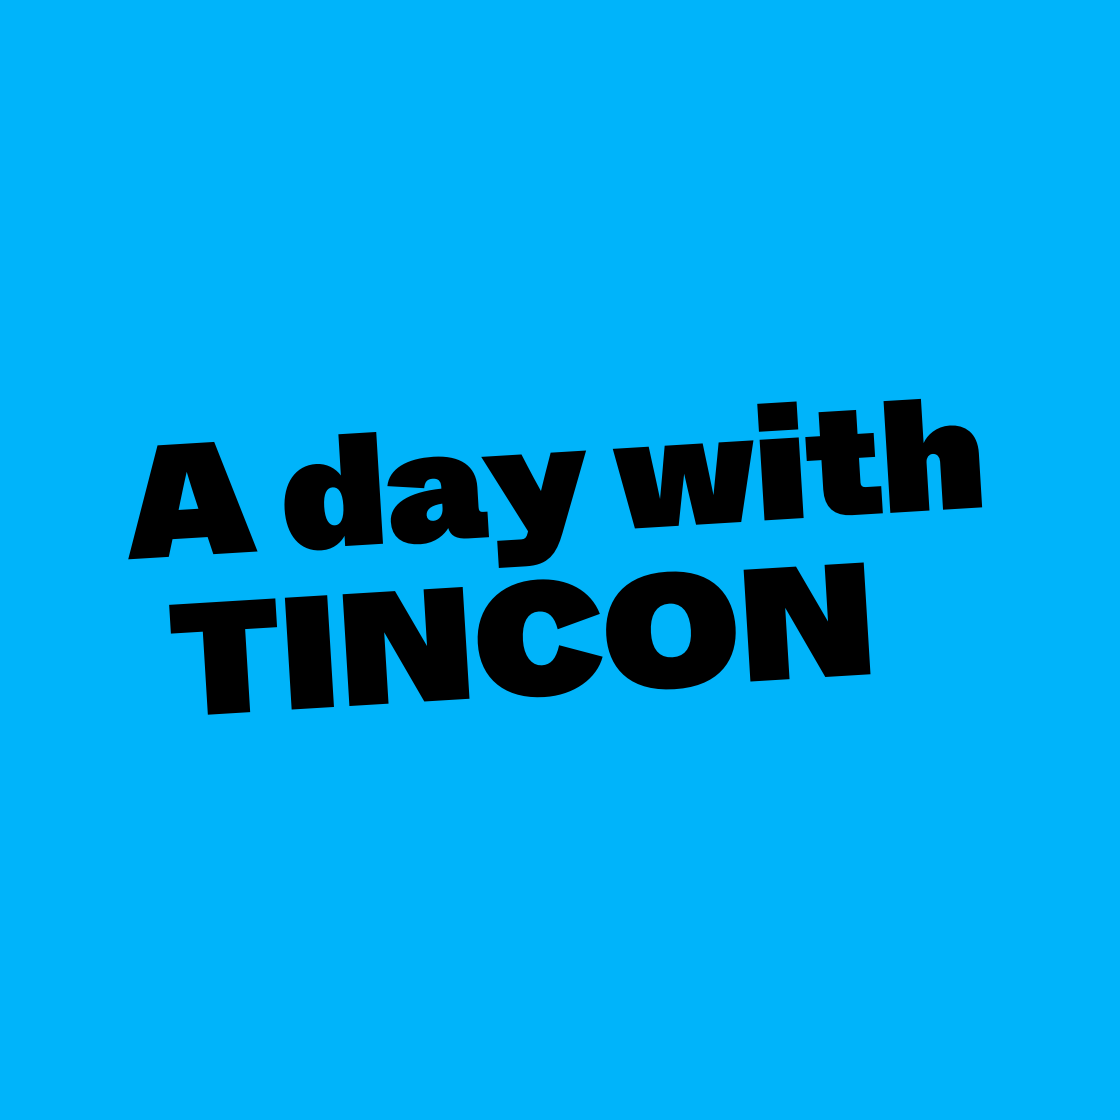 A day with TINCON